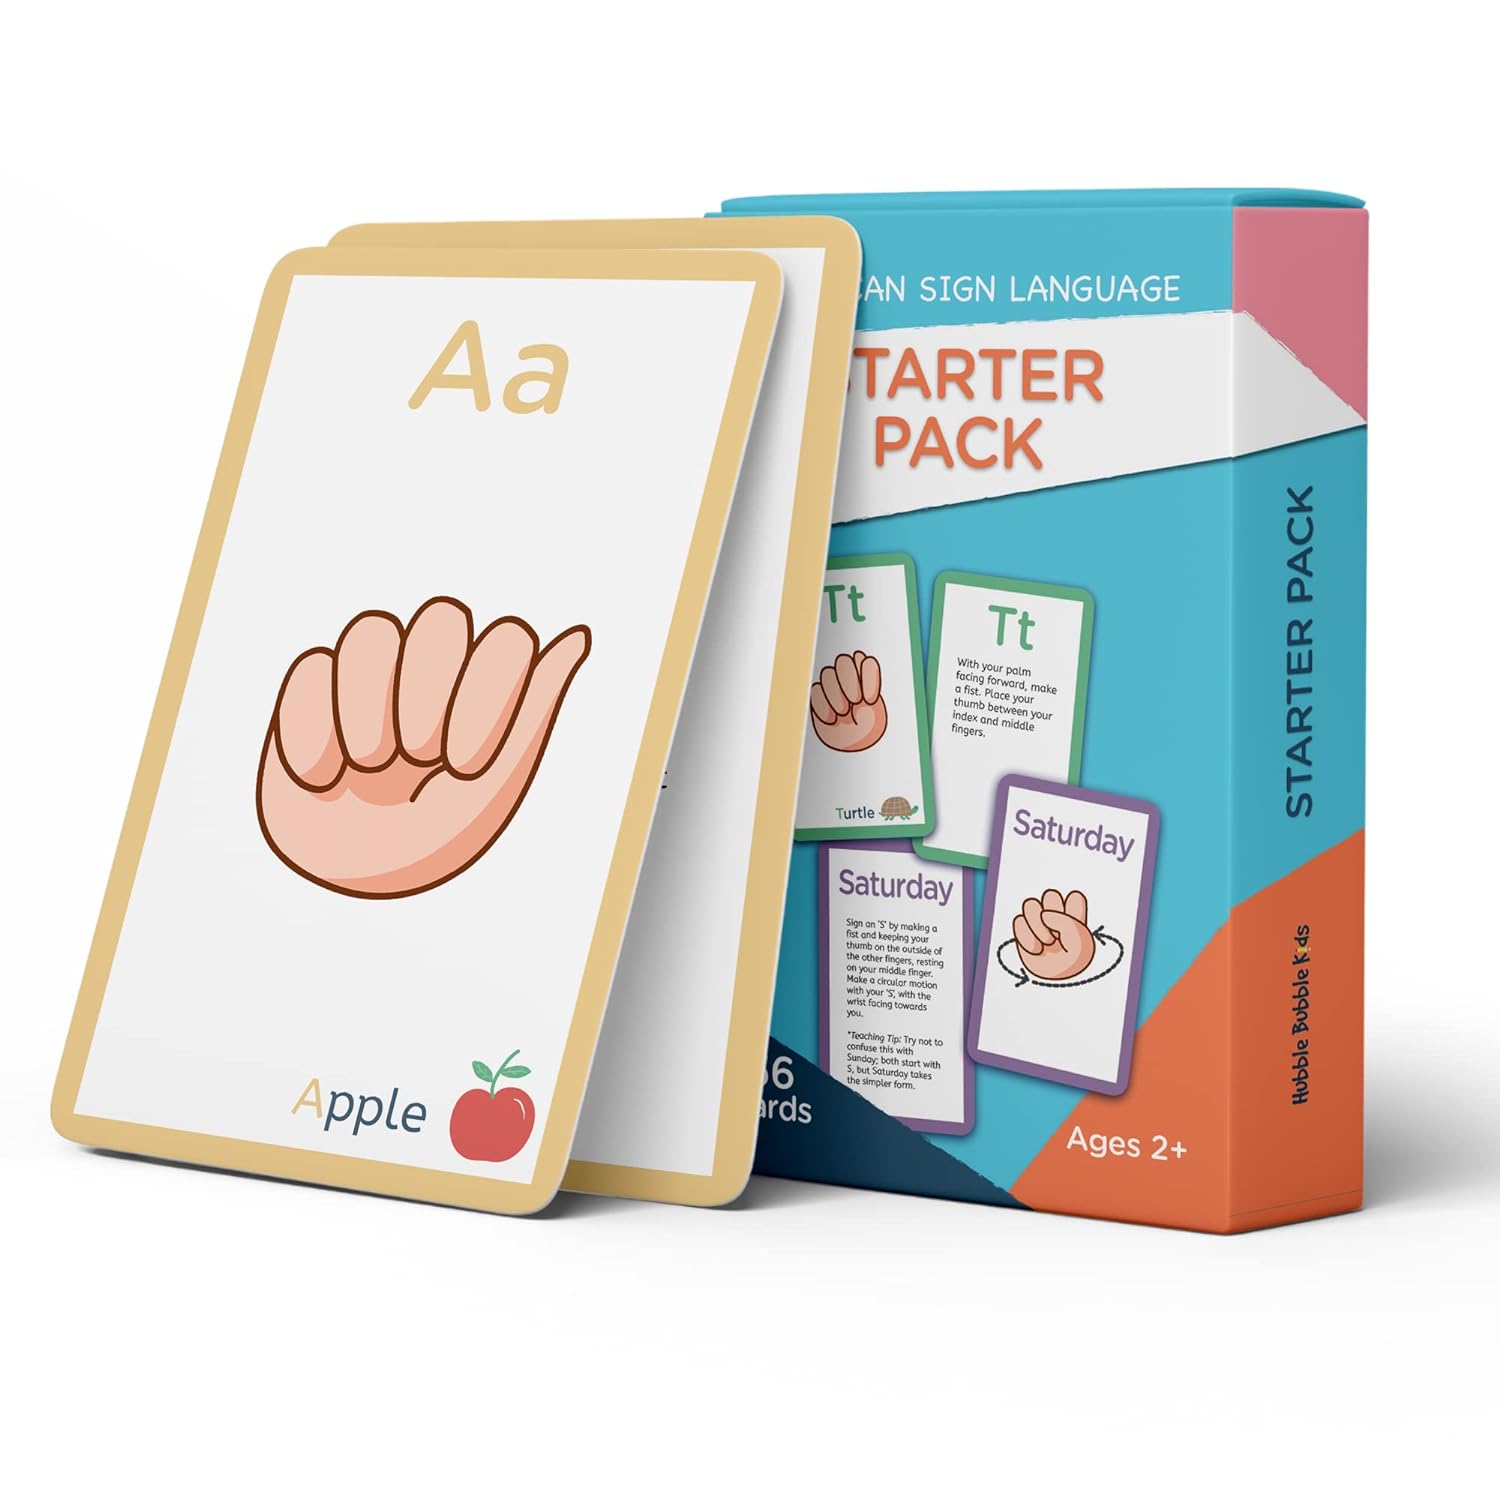 American Sign Language Flash Cards - 56 ASL Flash Cards for Kids, Babies, Toddlers. Sign Language for Kids Includes Alphabet, Numbers, Days, & Months. ASL Cards with Pictures and Descriptions.